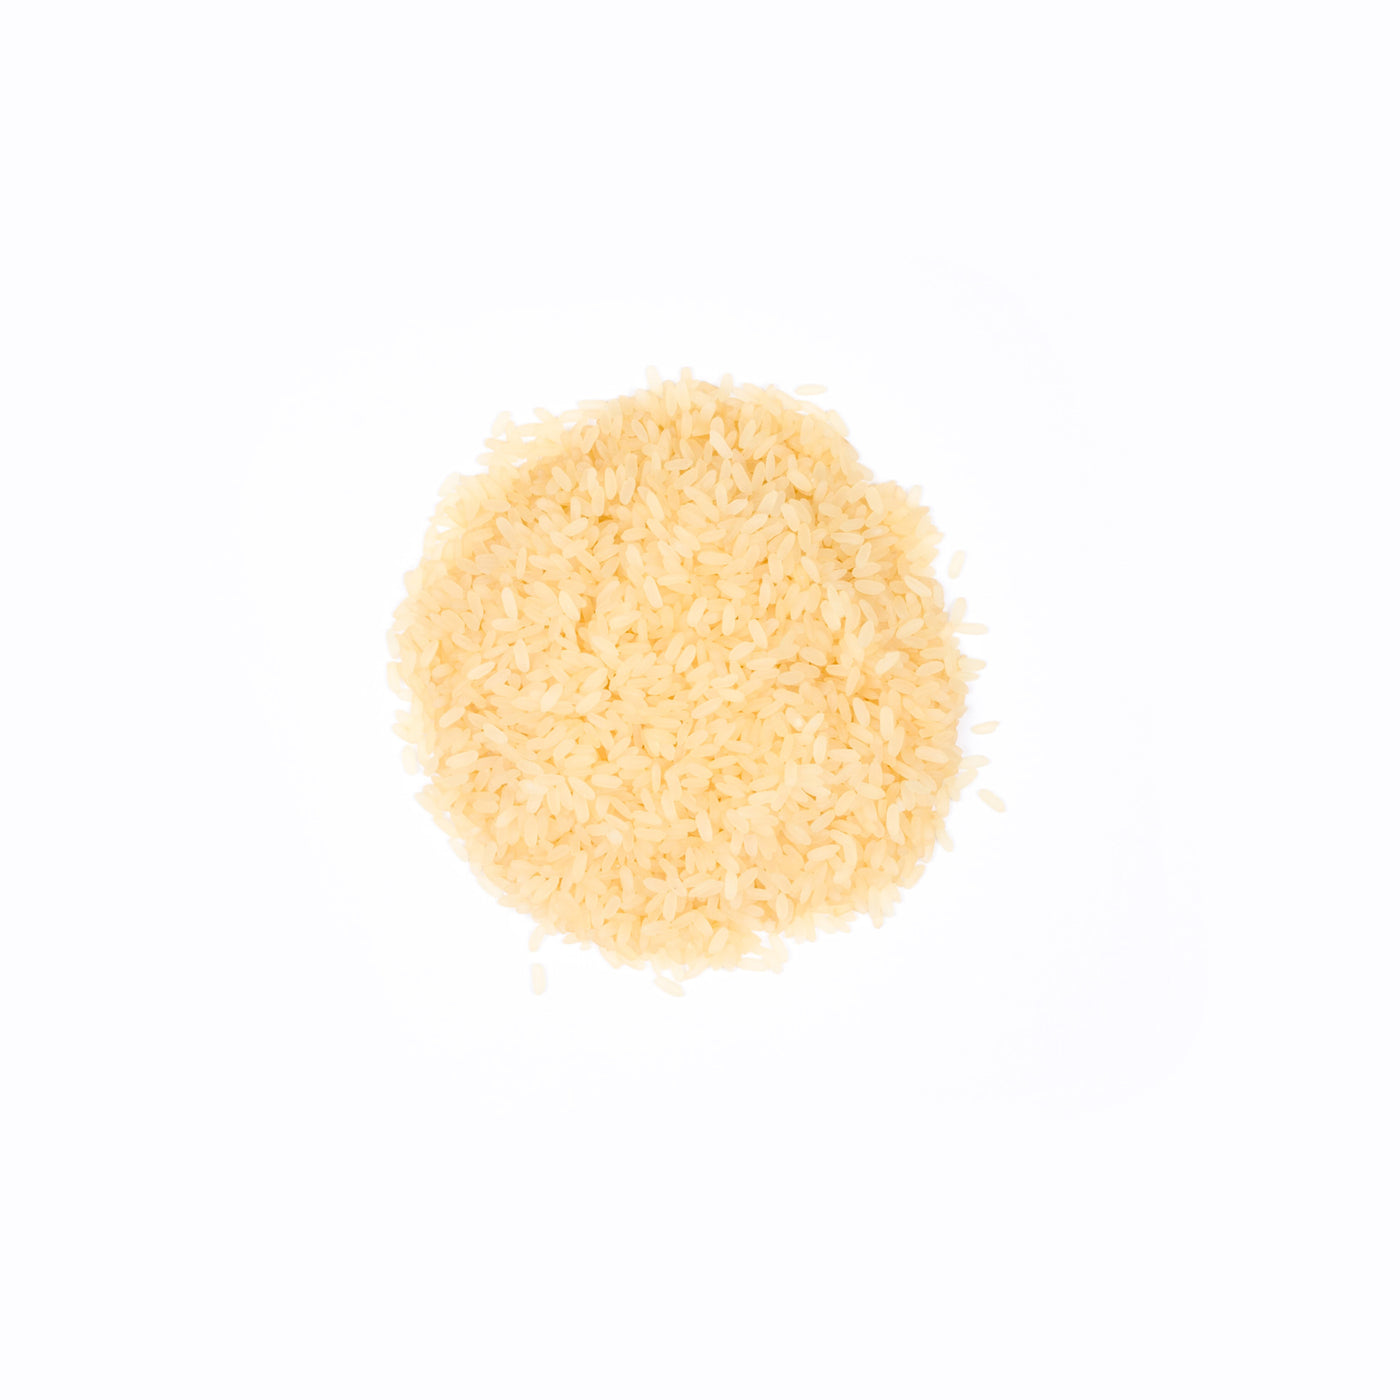 Long rice with yellow ribe